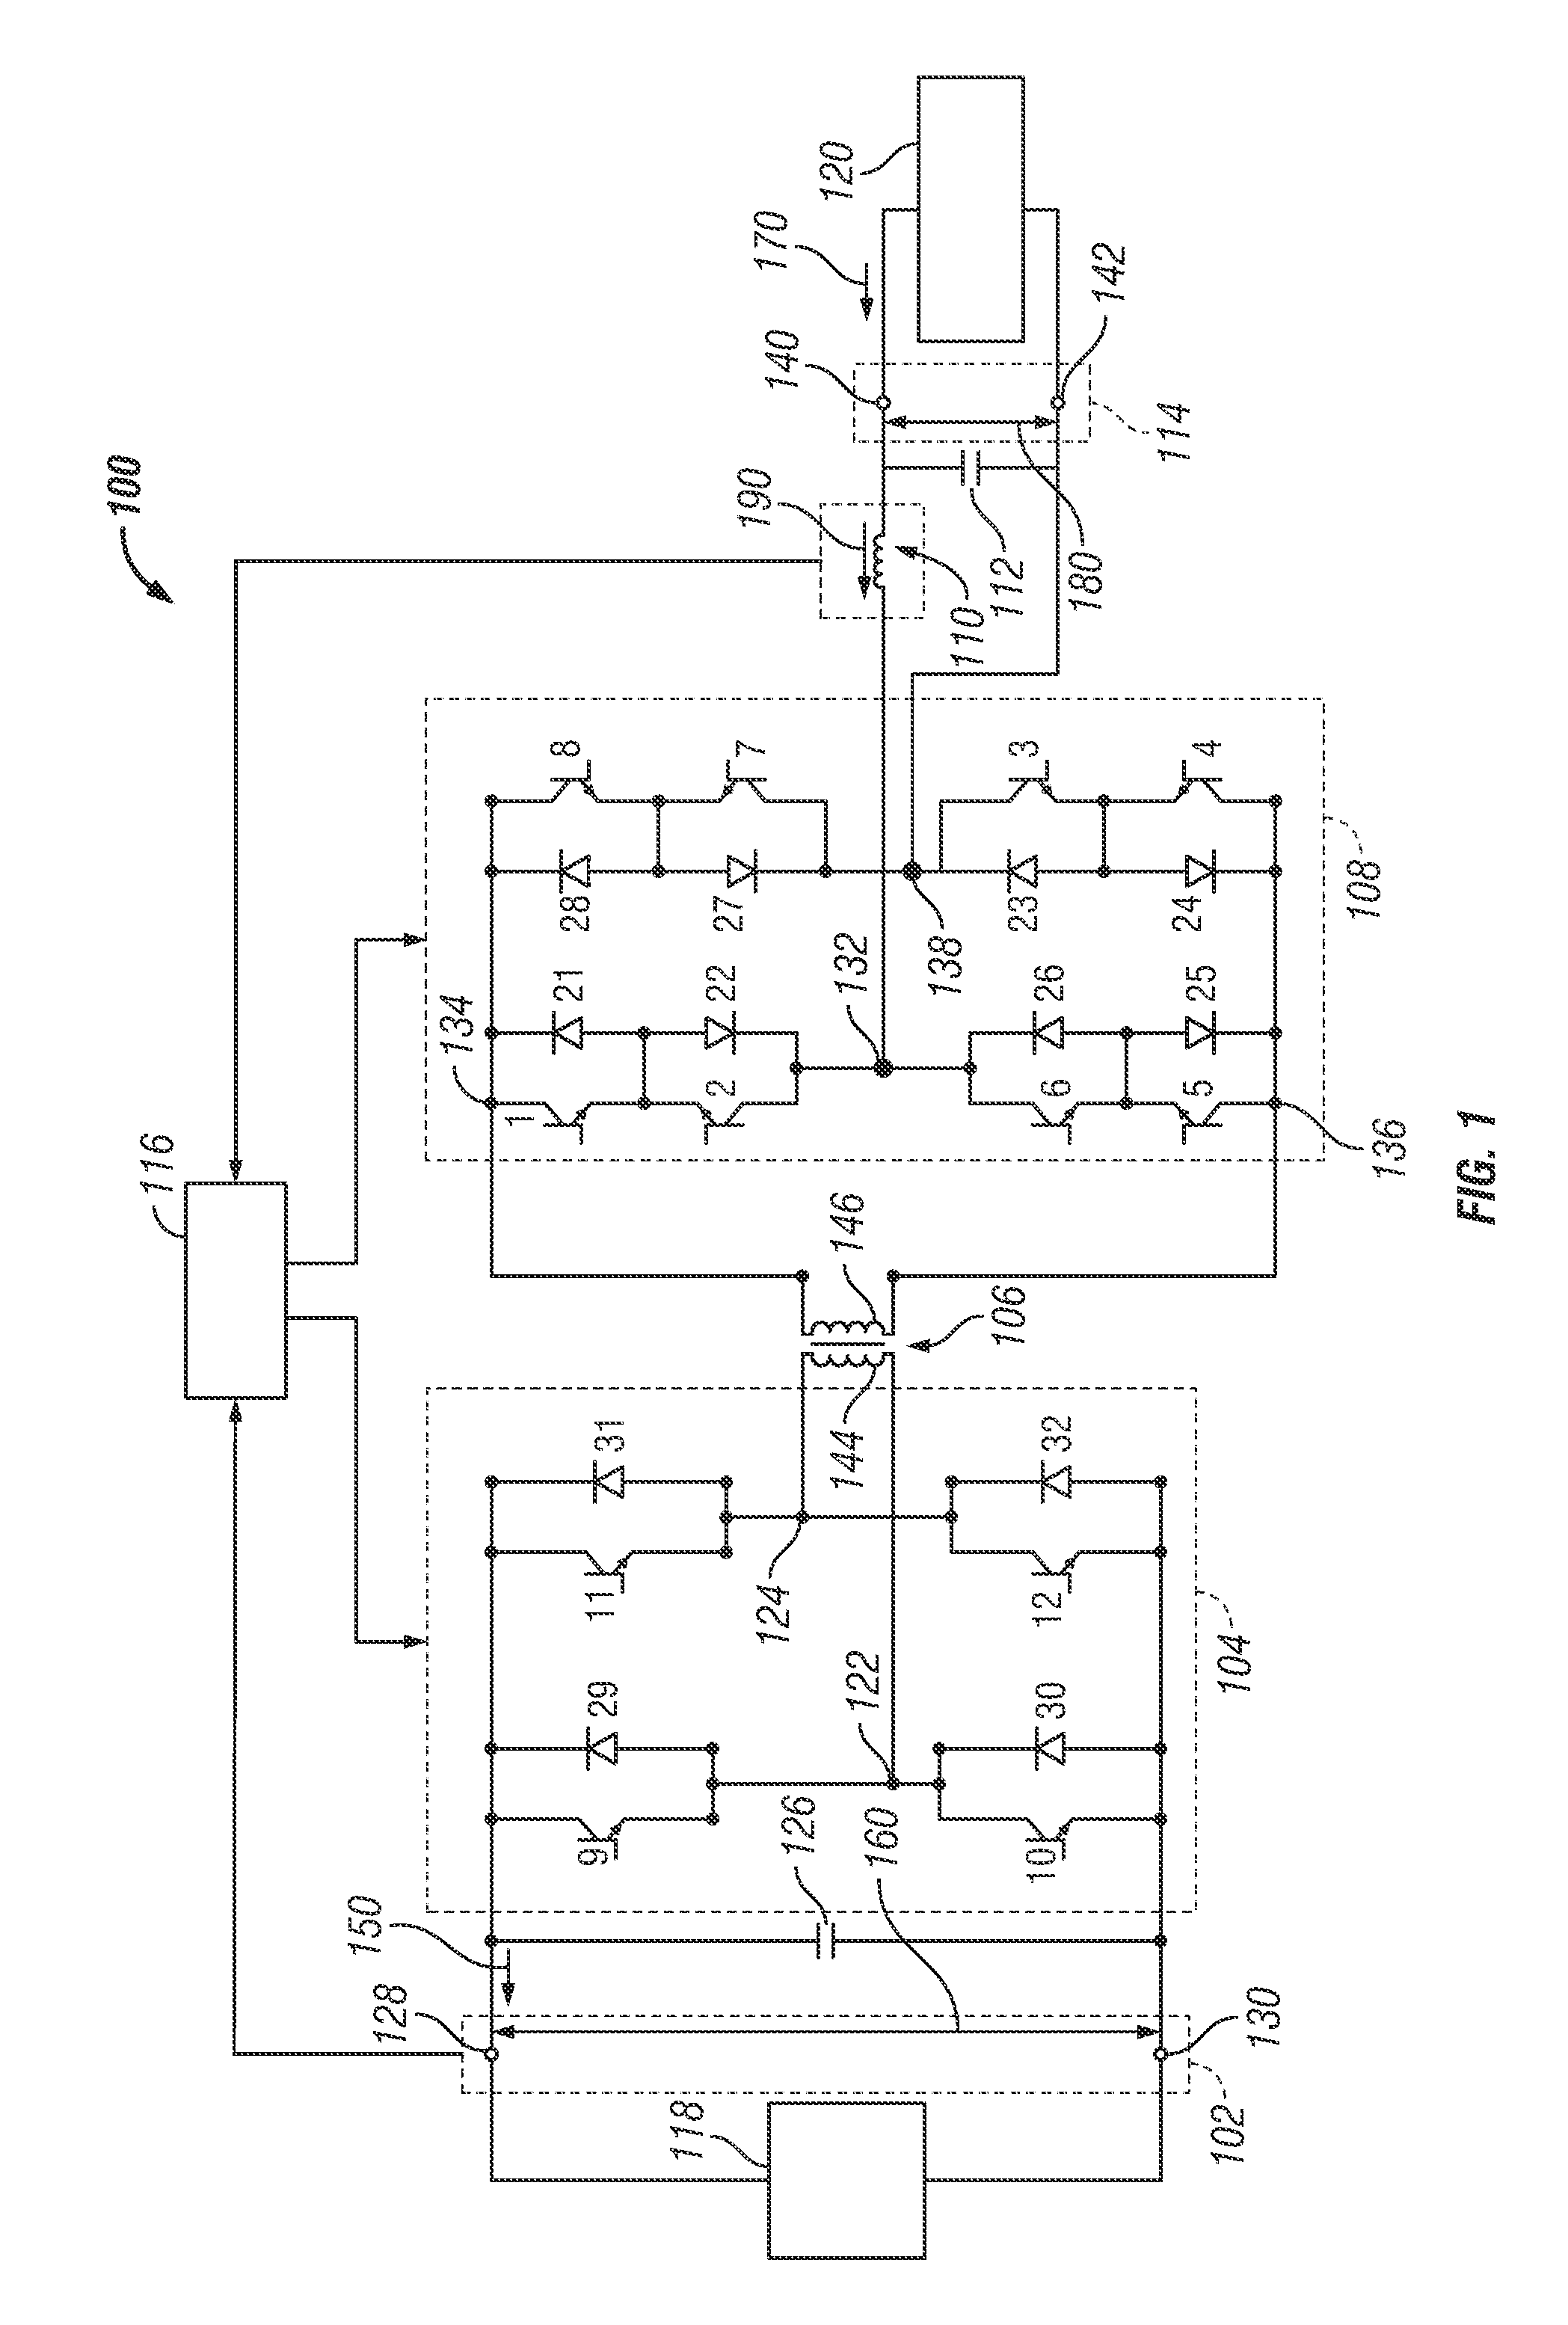 Systems and methods for reducing transient voltage spikes in matrix converters